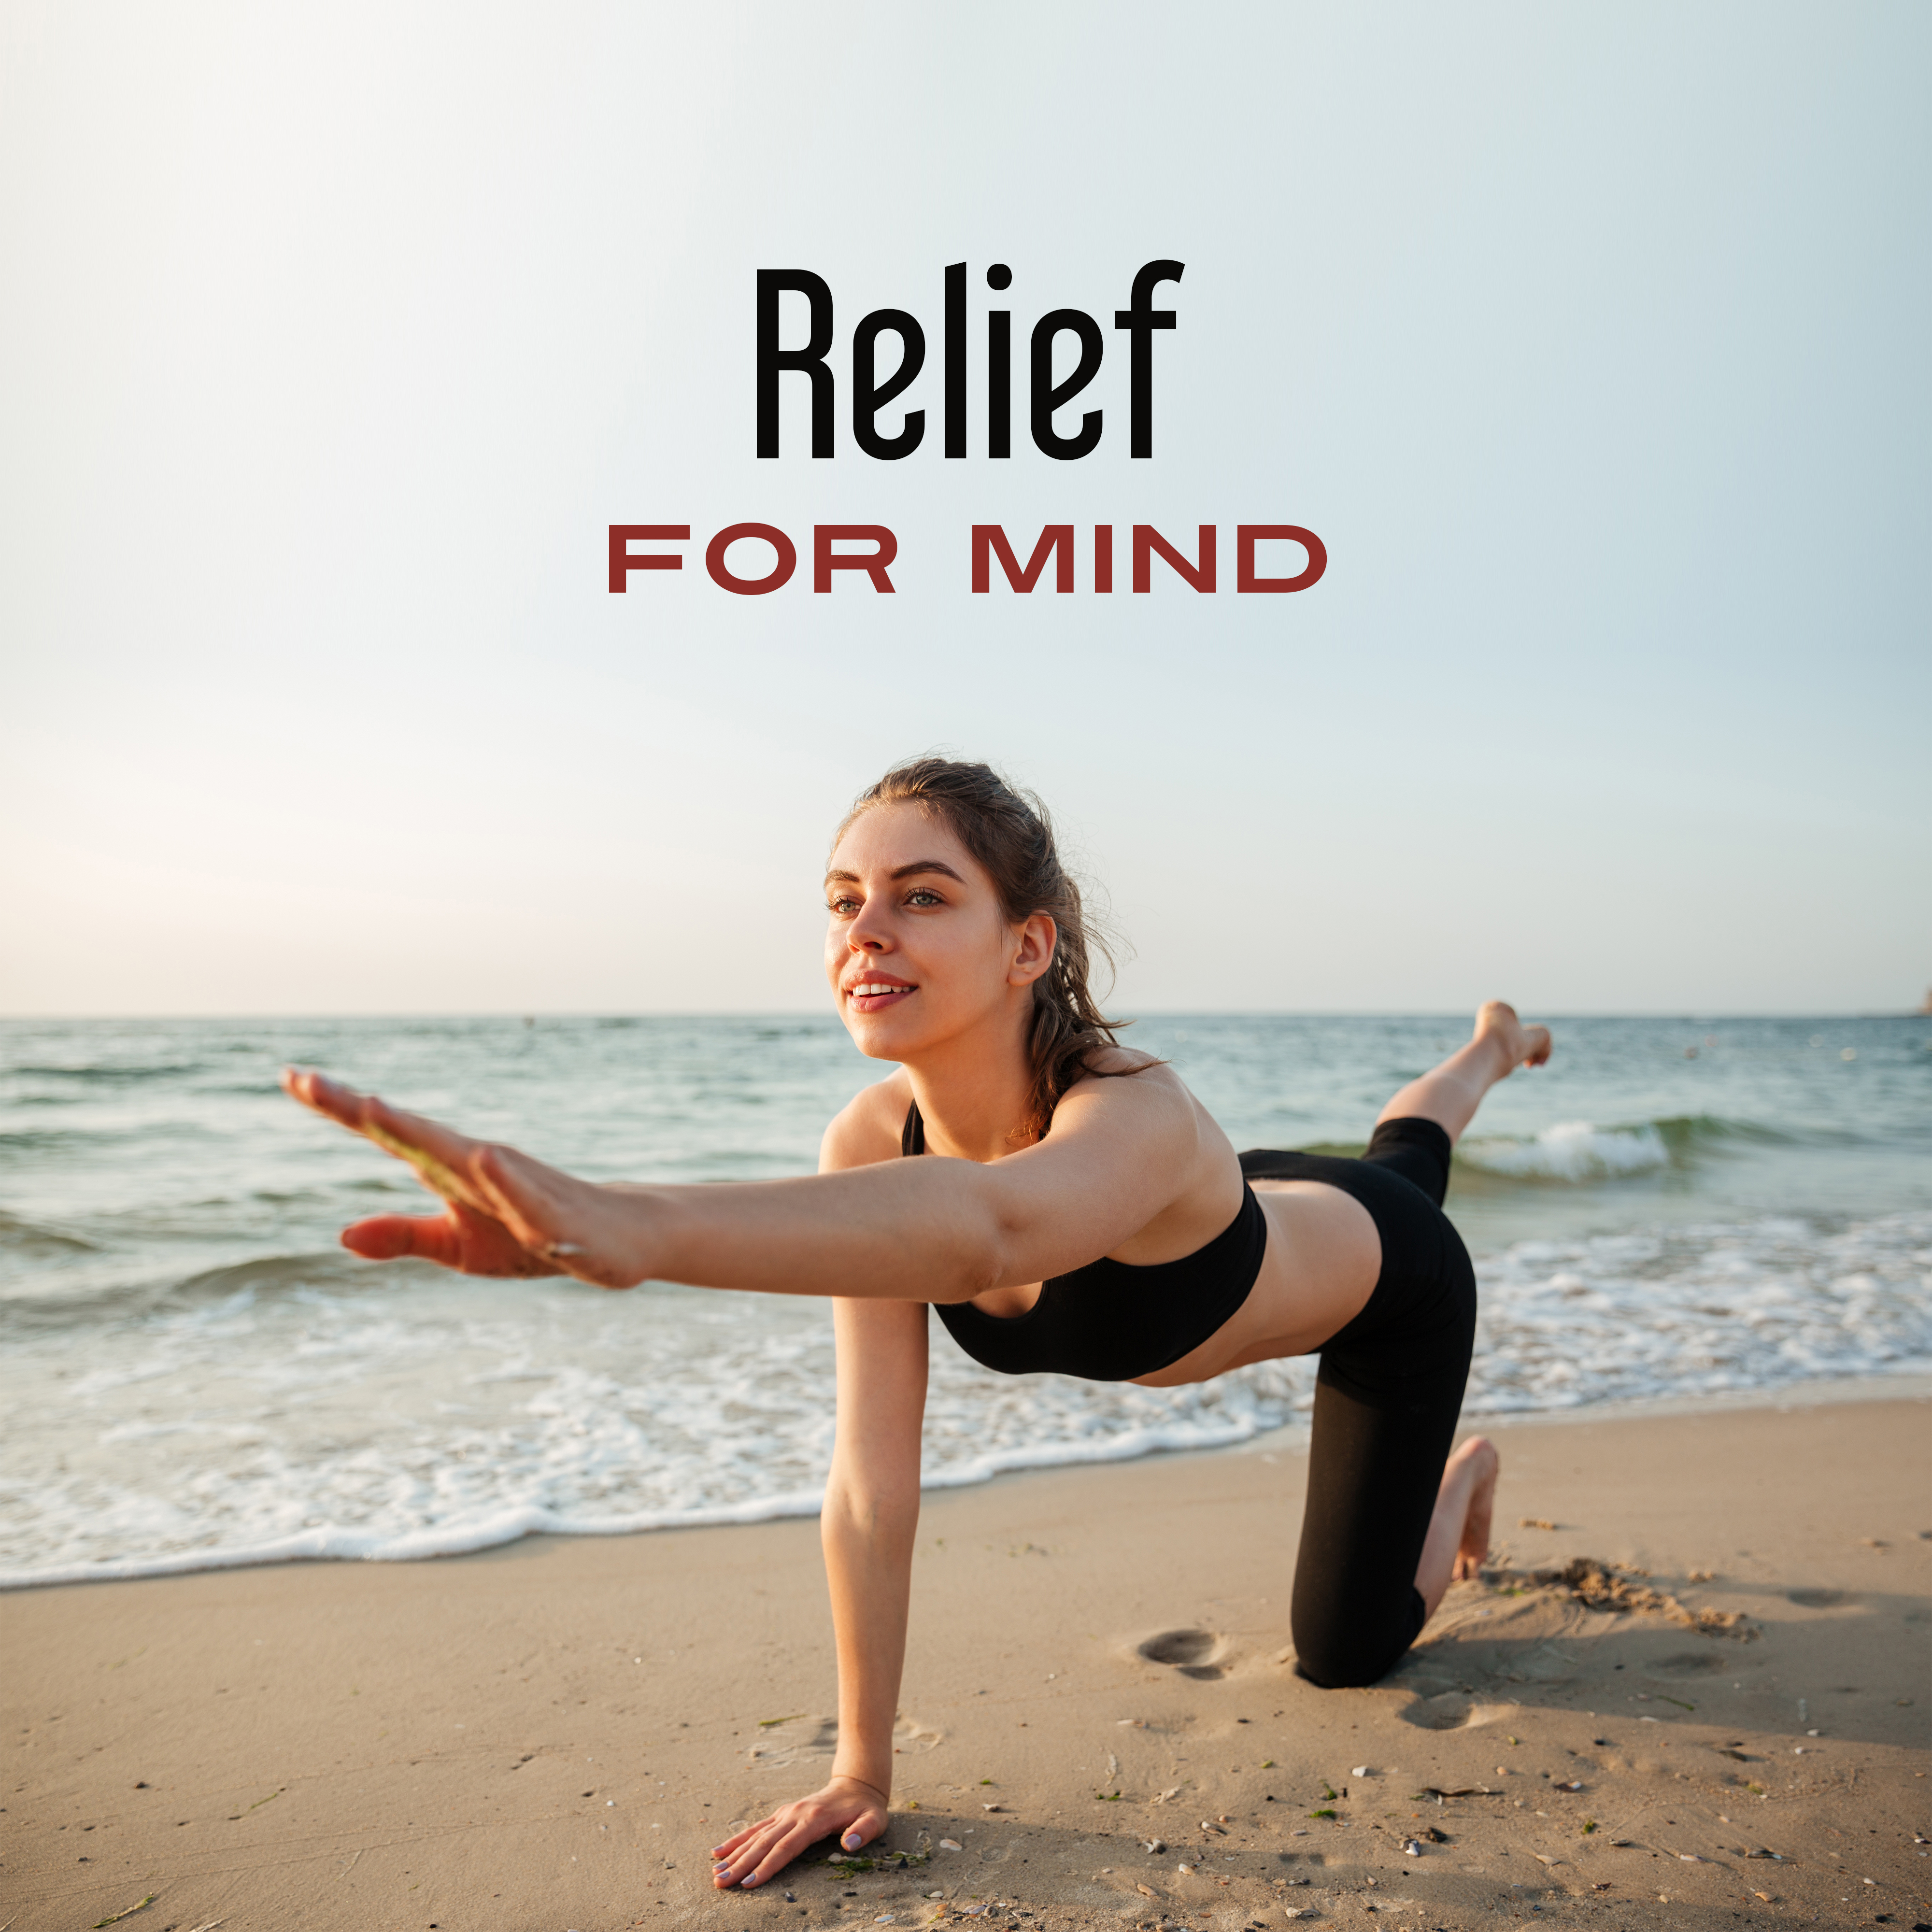 Relief for Mind – Anti Stress Music, Peaceful Music for Meditation, Sounds of Yoga, Relax, Spiritual Journey, Pure Mind, Yoga Meditation